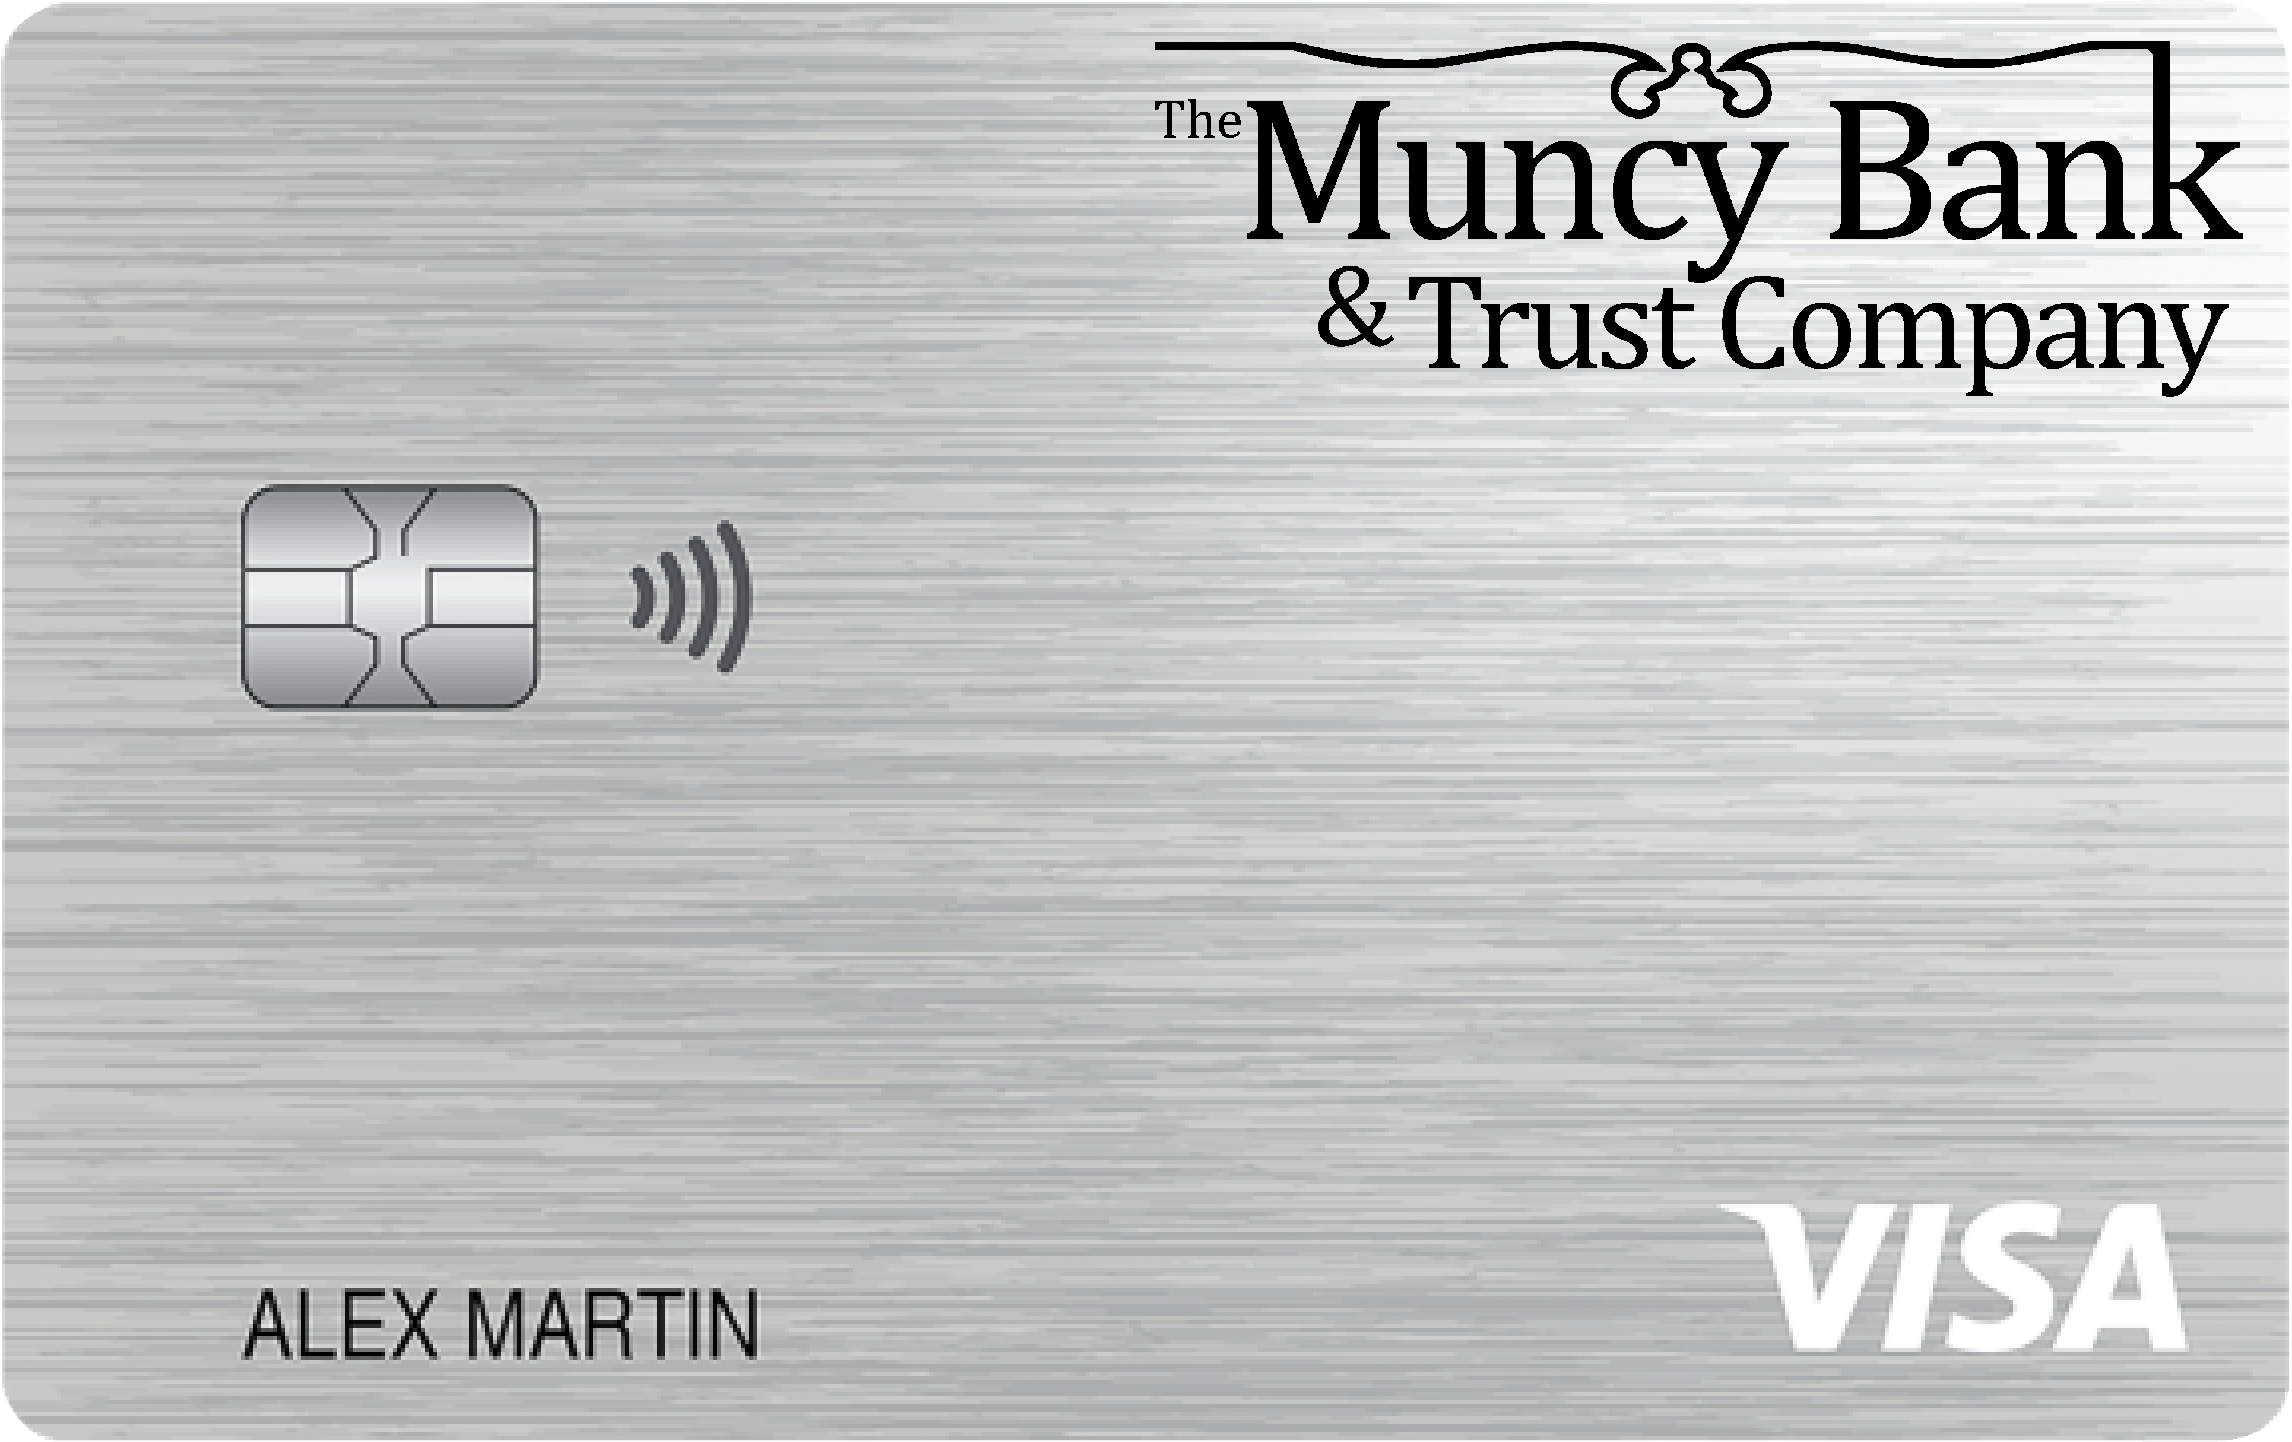 The Muncy Bank & Trust Company Secured Card